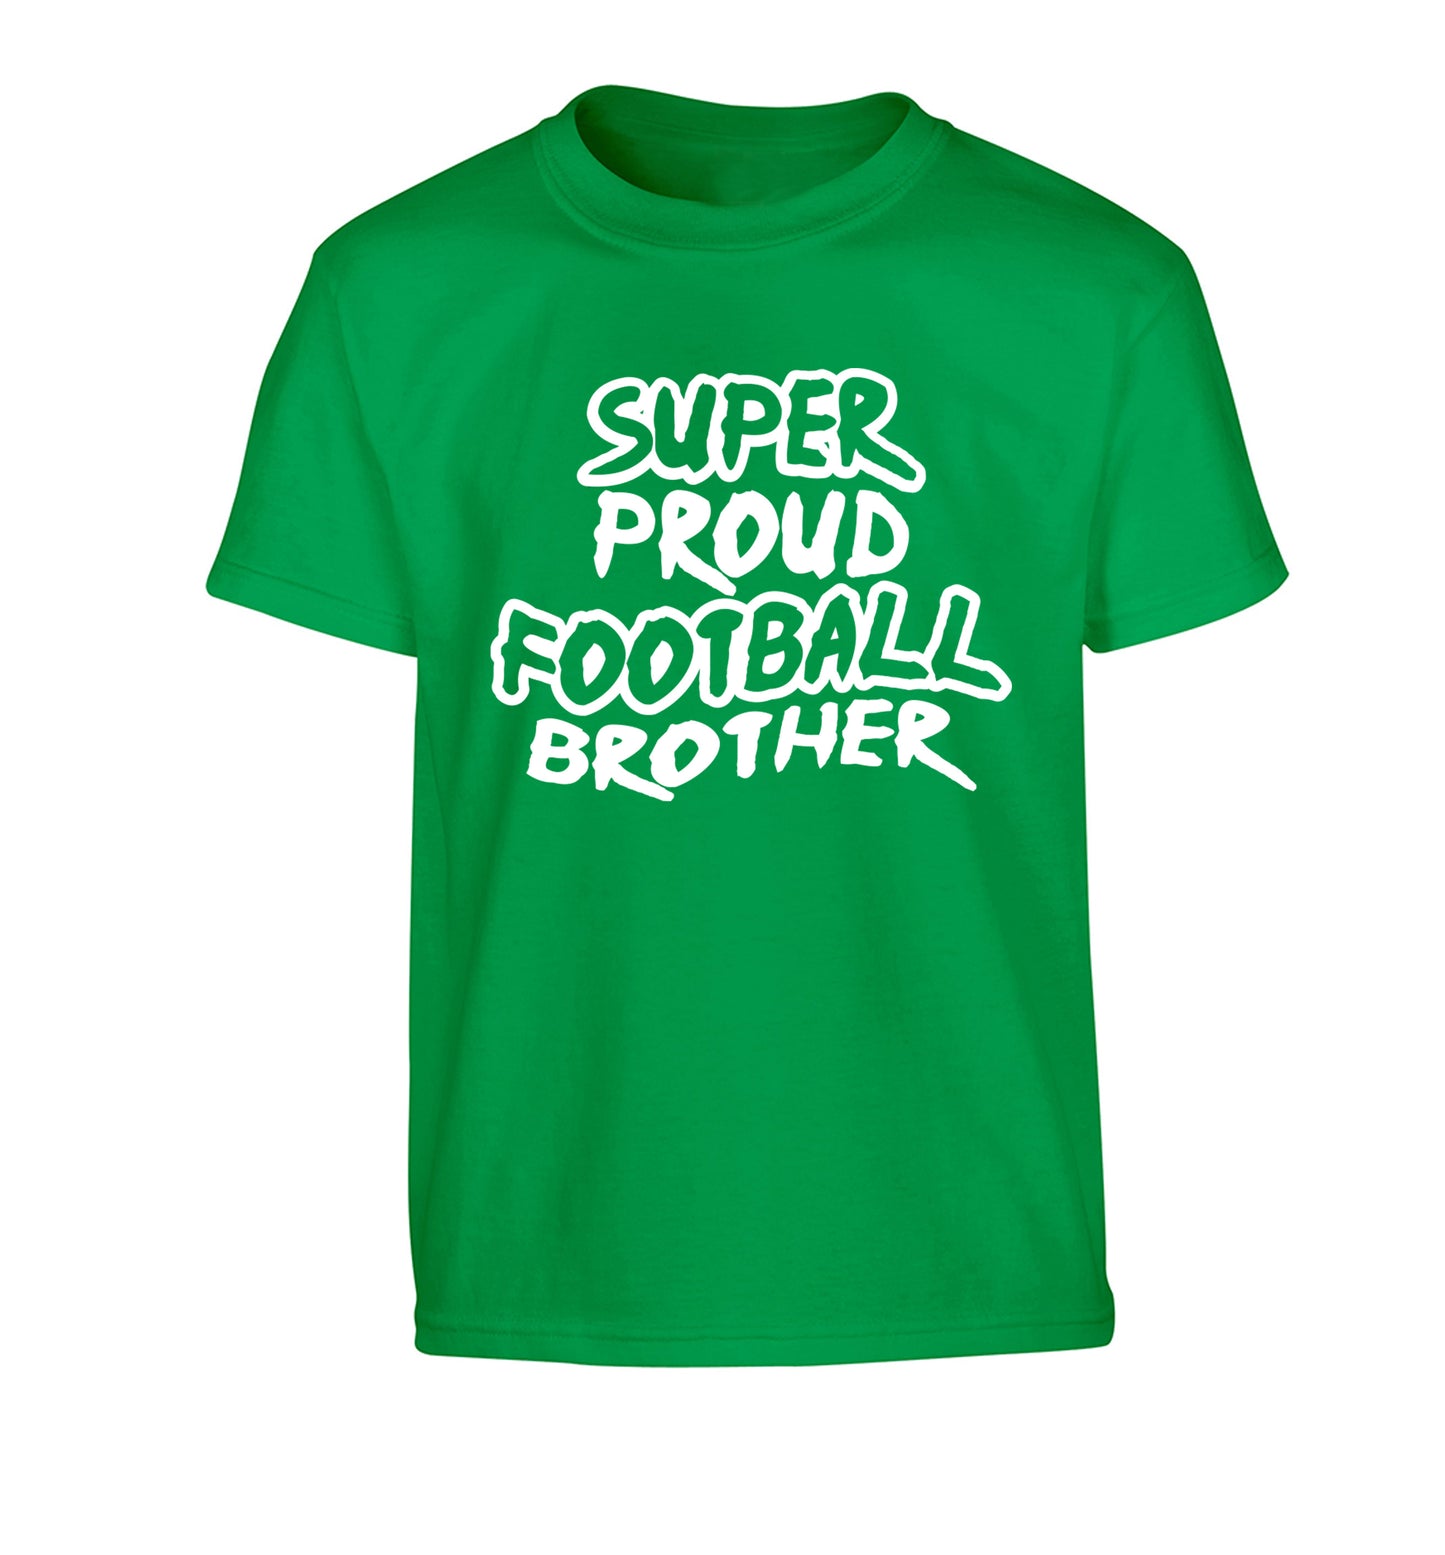 Super proud football brother Children's green Tshirt 12-14 Years